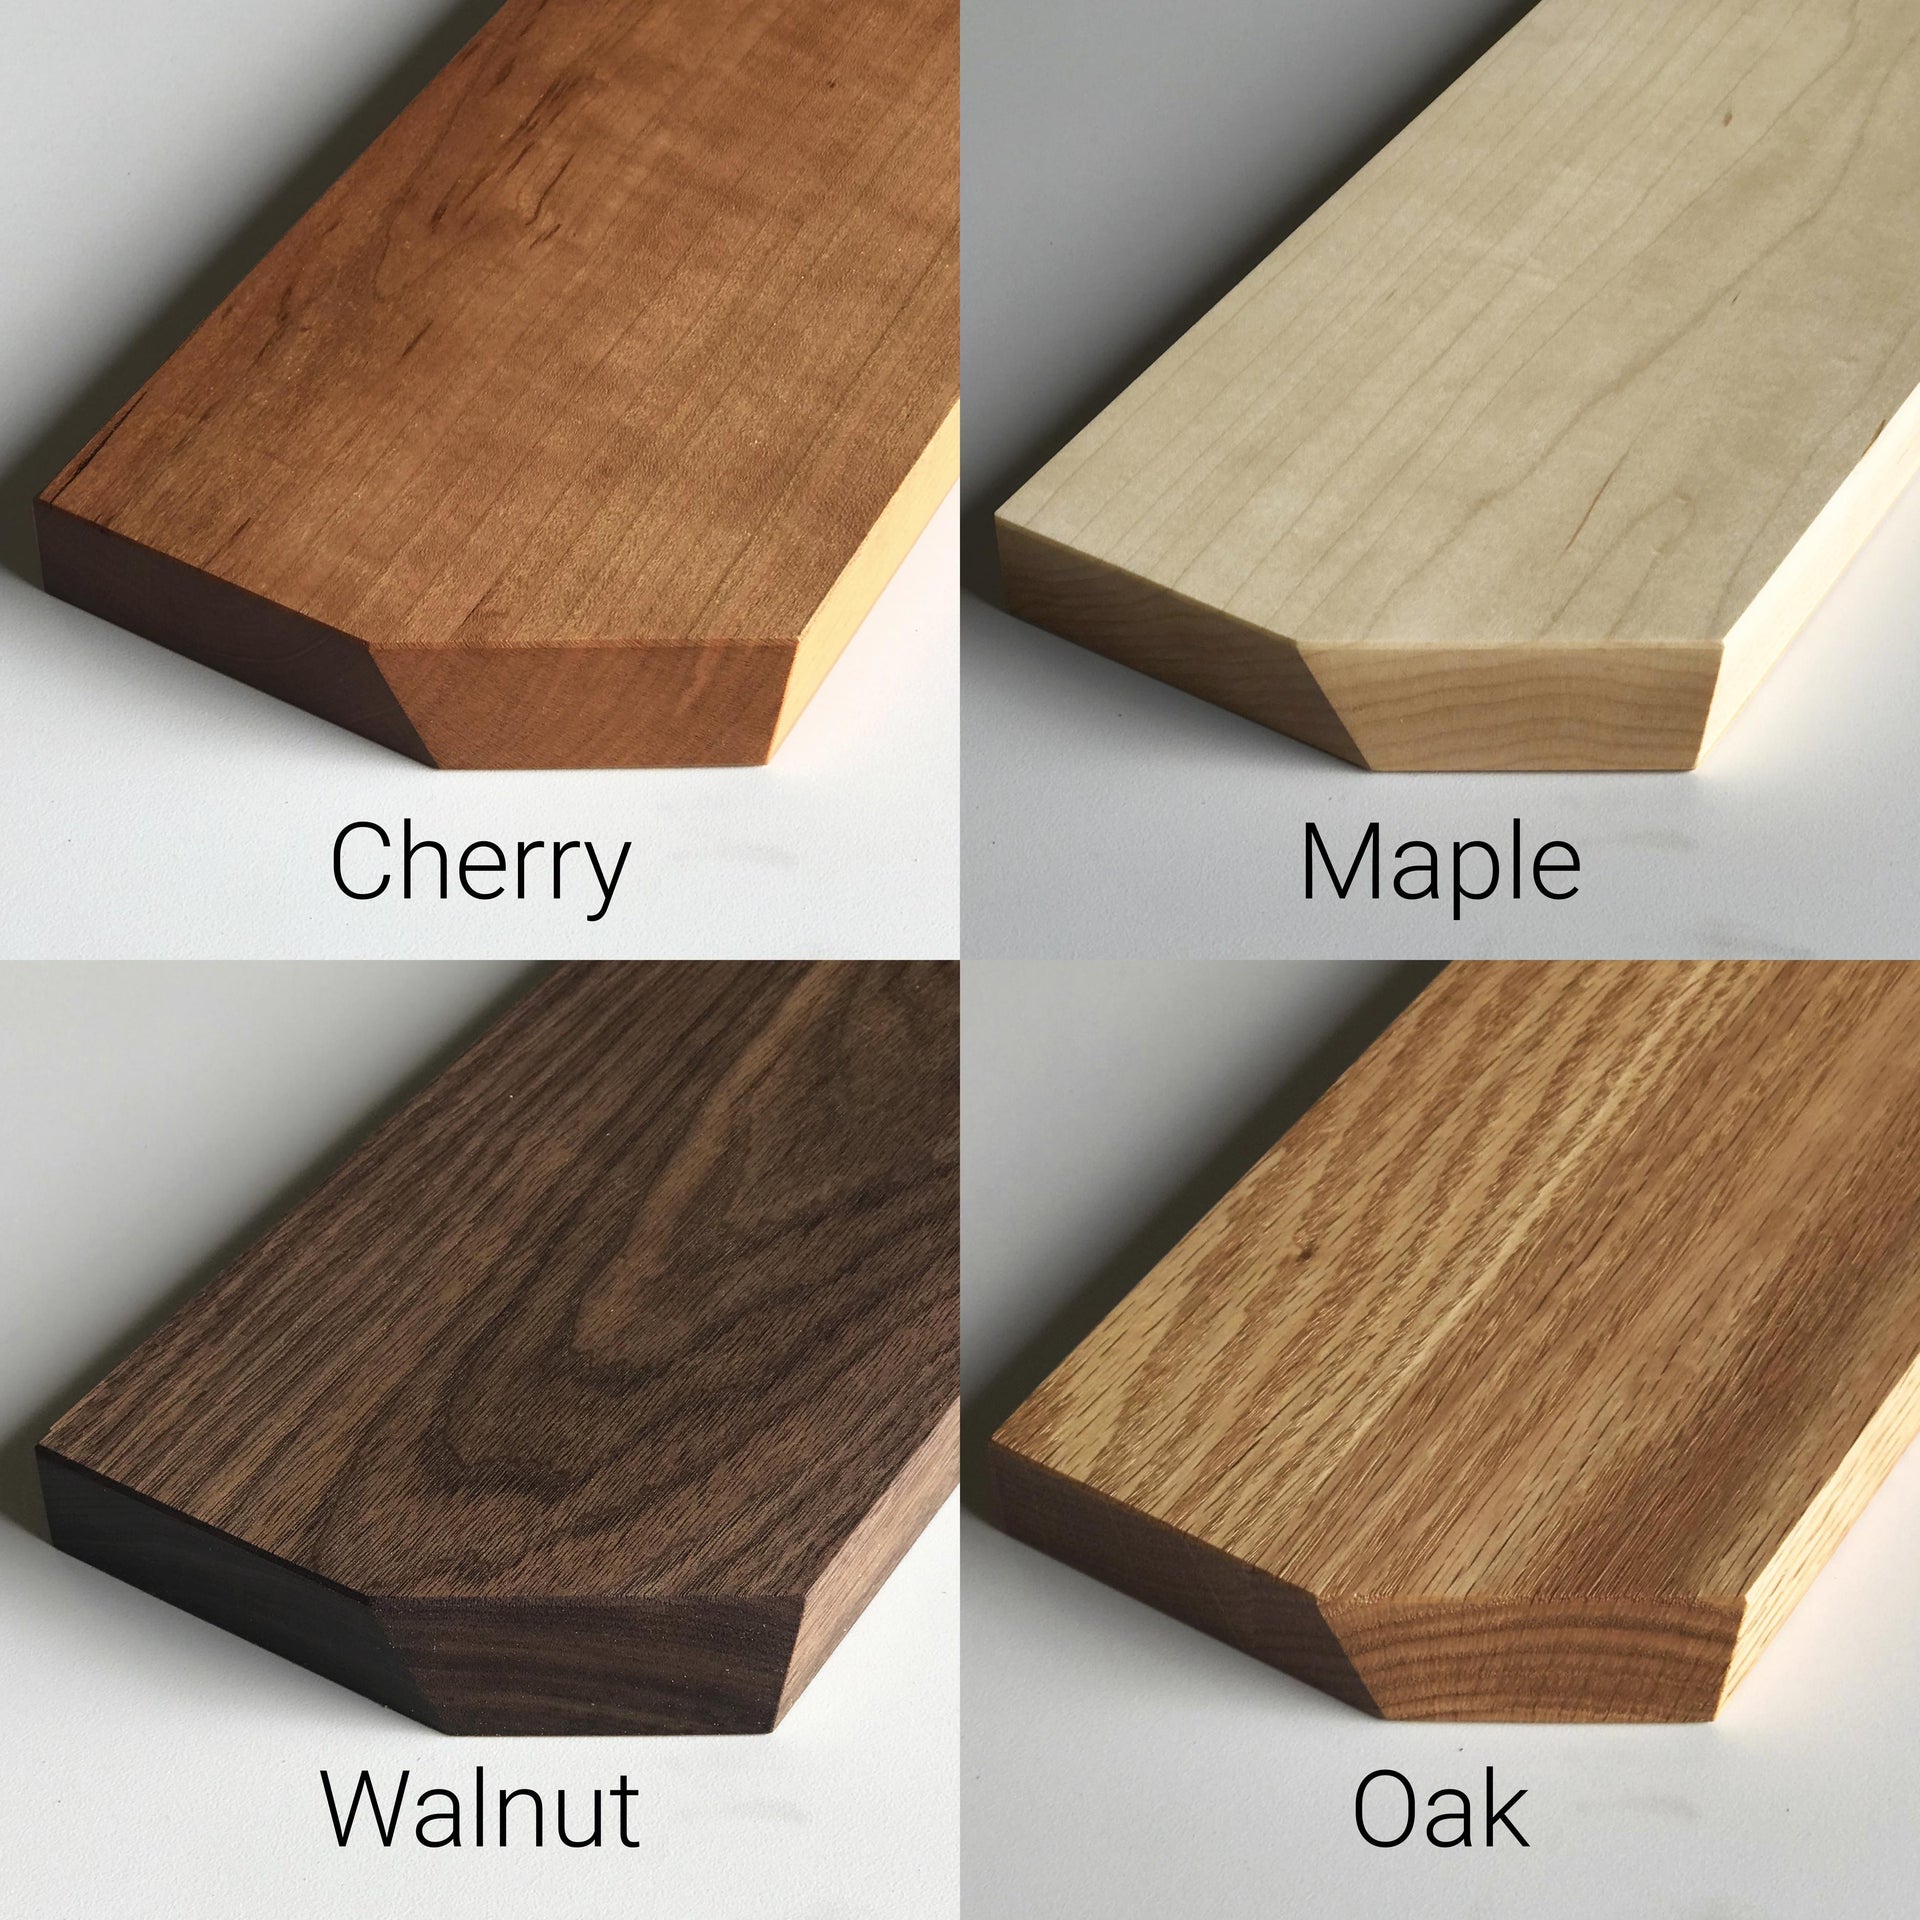 Solid wood samples for 100% natural cherry, maple, walnut, and oak